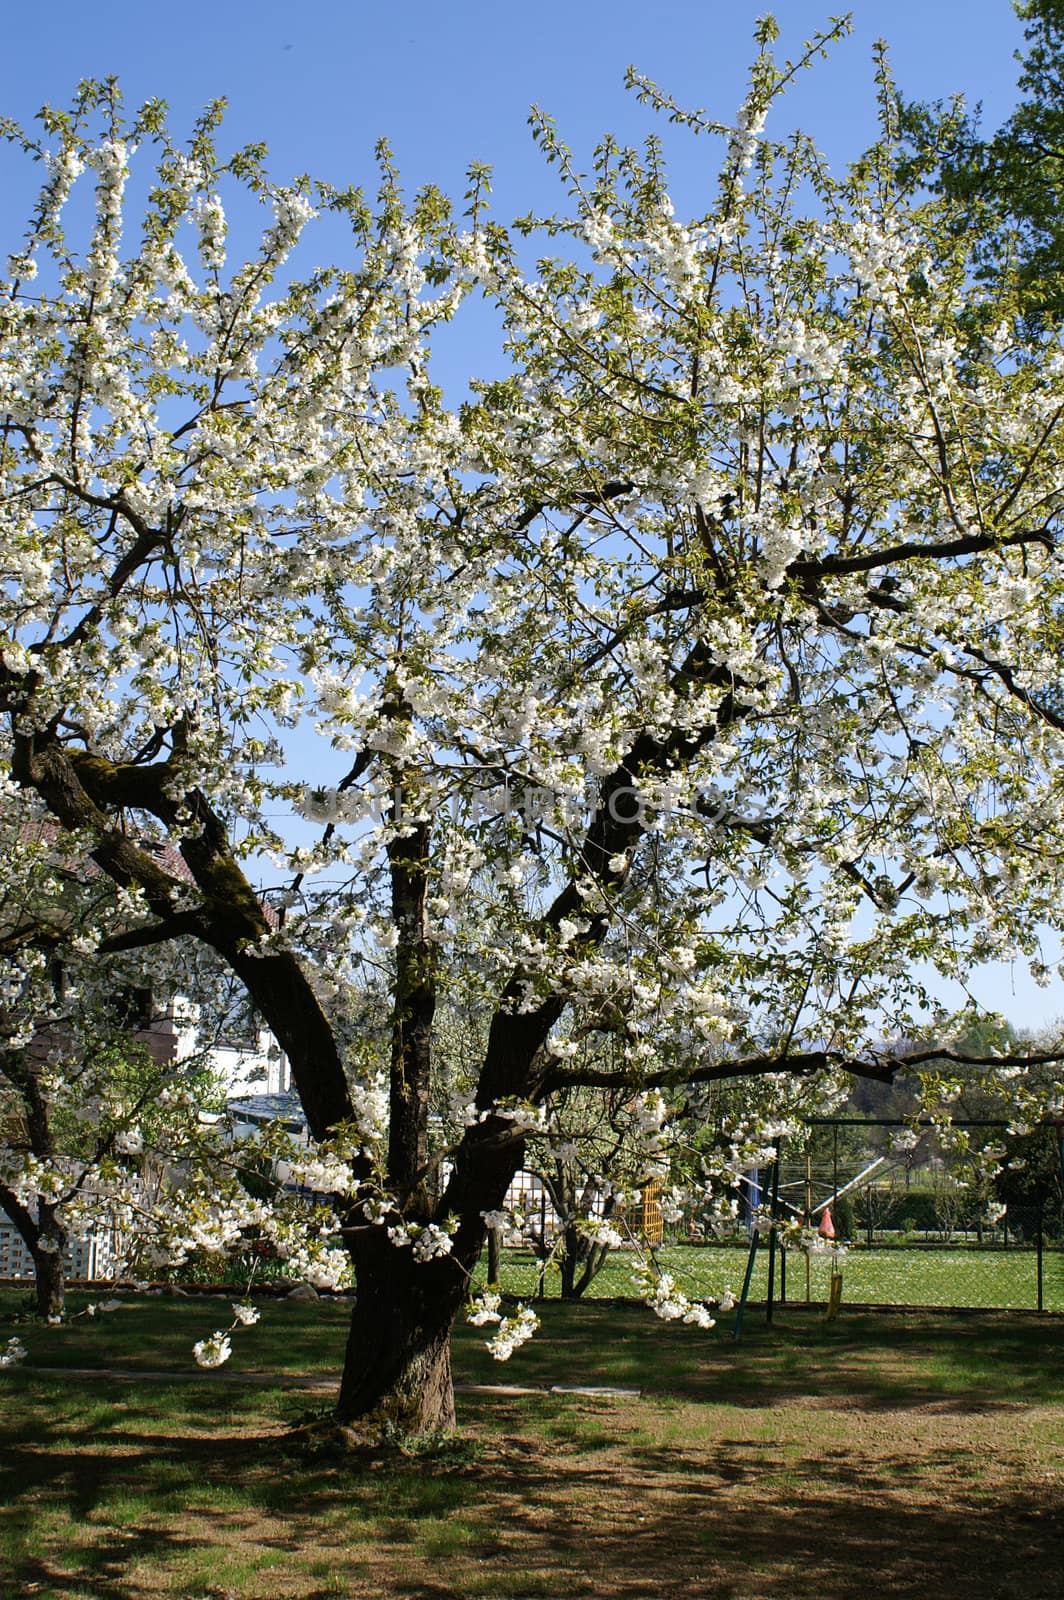 trees bloom in spring in fine weather